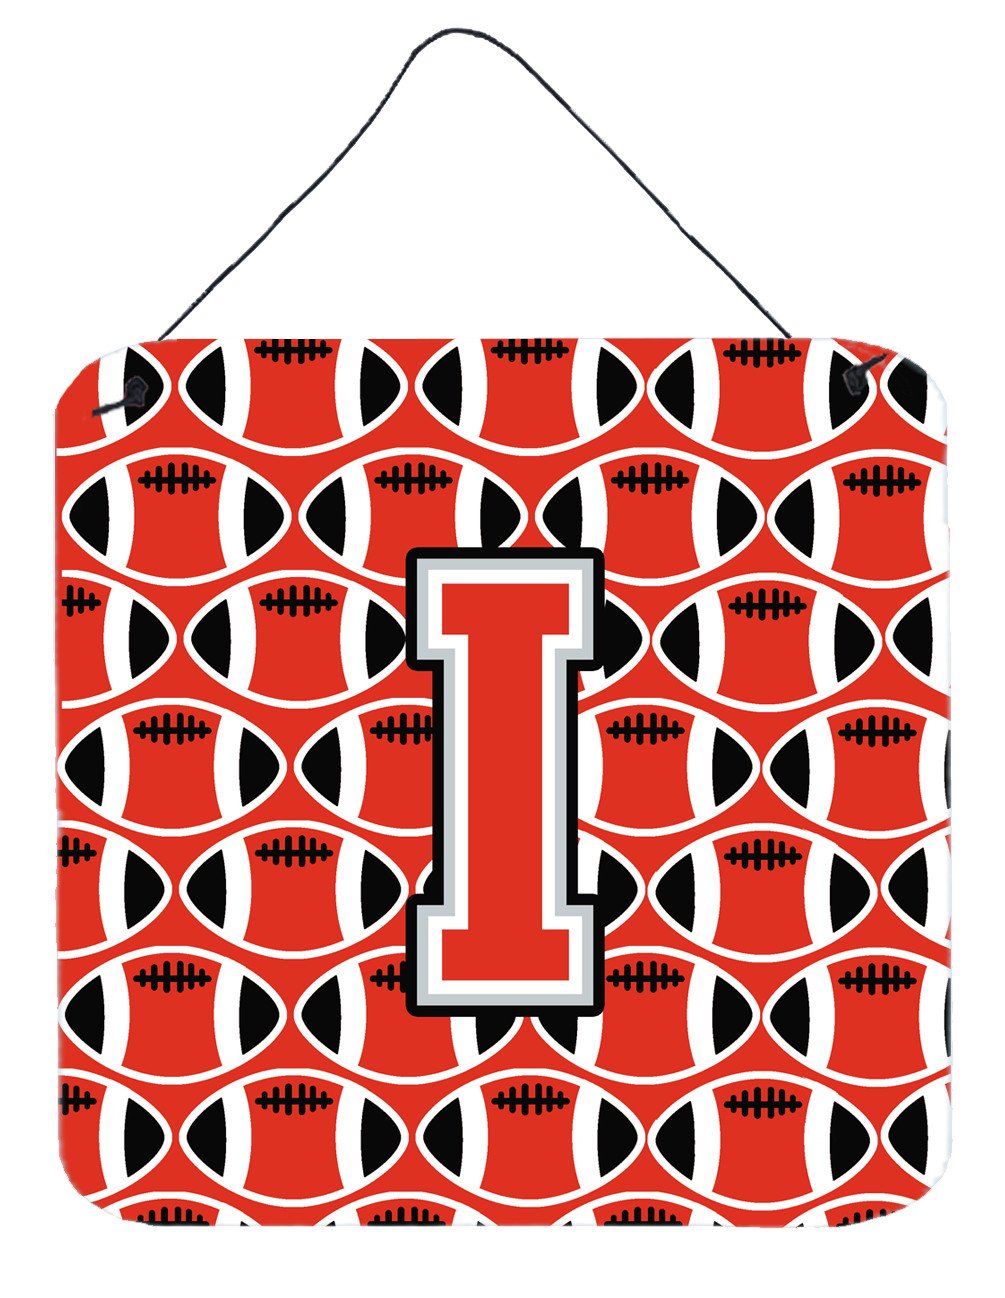 Letter I Football Scarlet and Grey Wall or Door Hanging Prints CJ1067-IDS66 by Caroline's Treasures